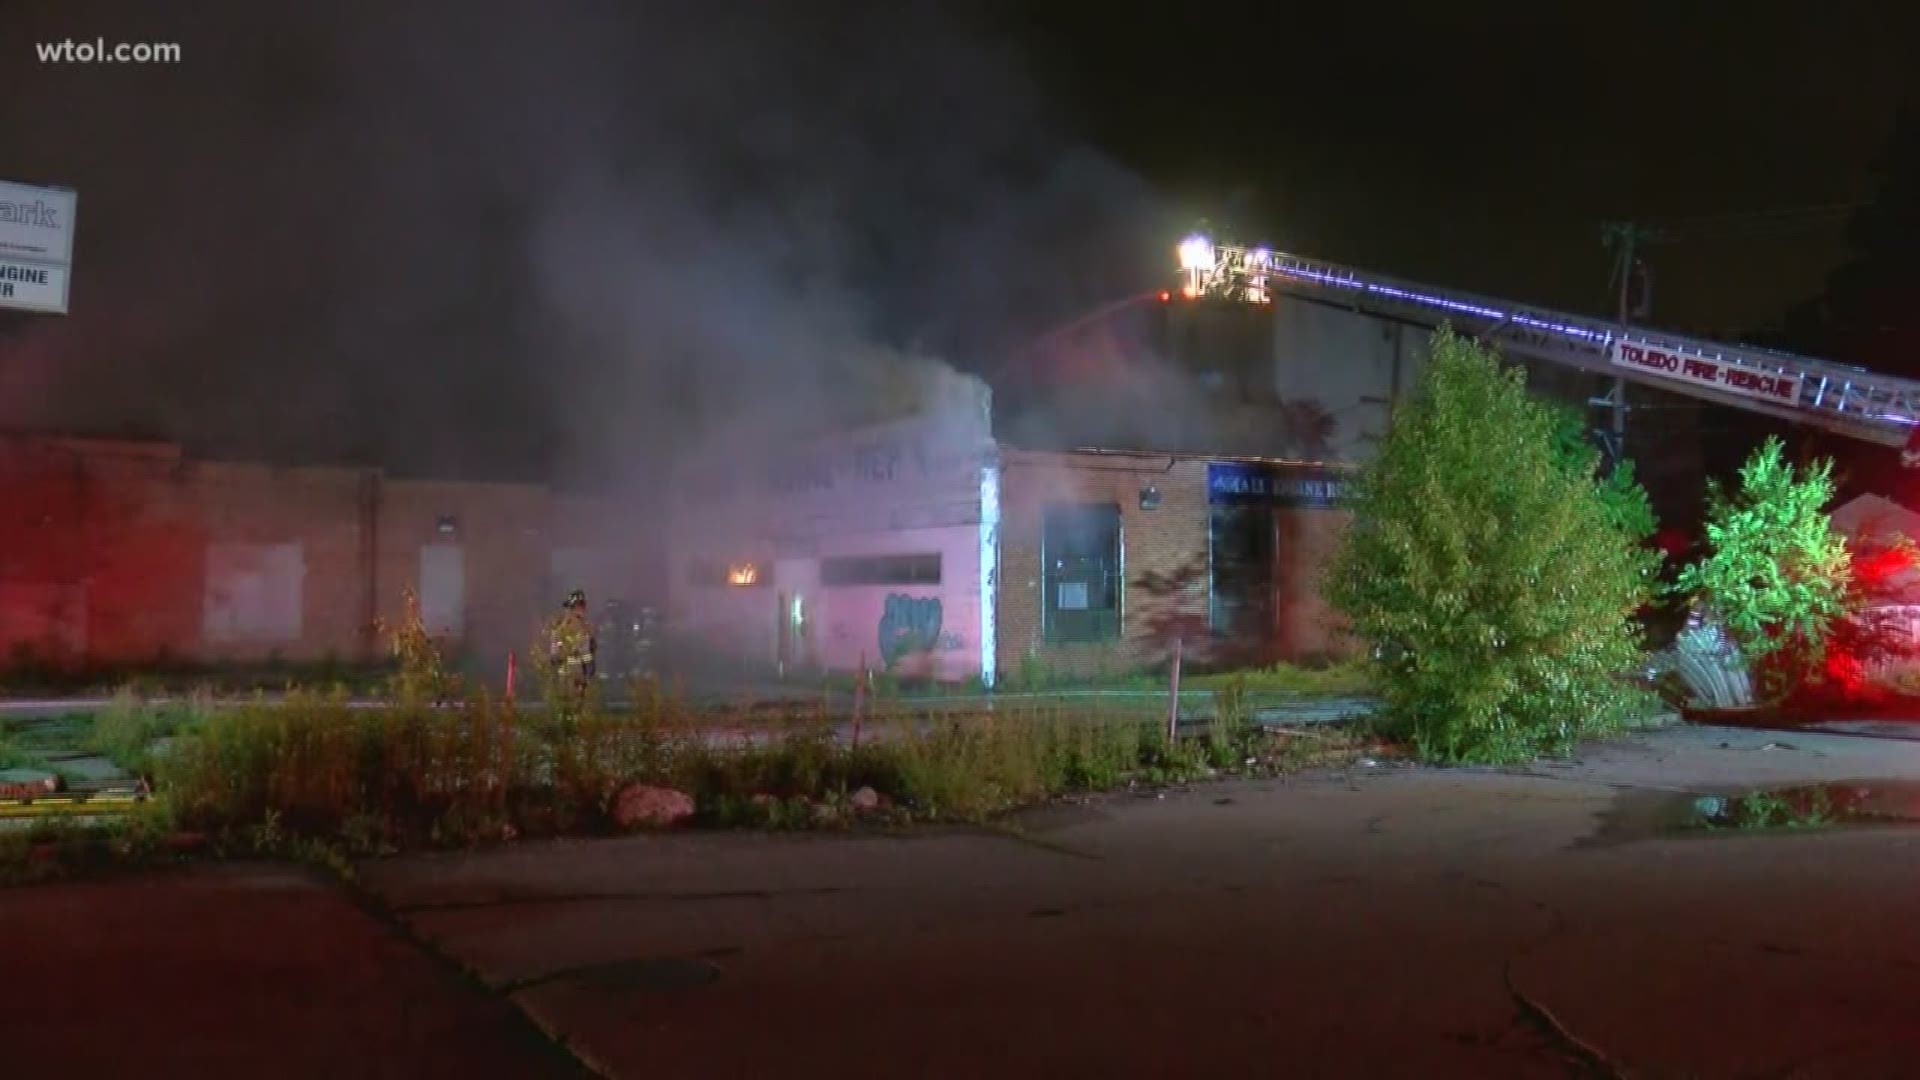 An engine repair shop caught on fire in east Toledo Sunday night.